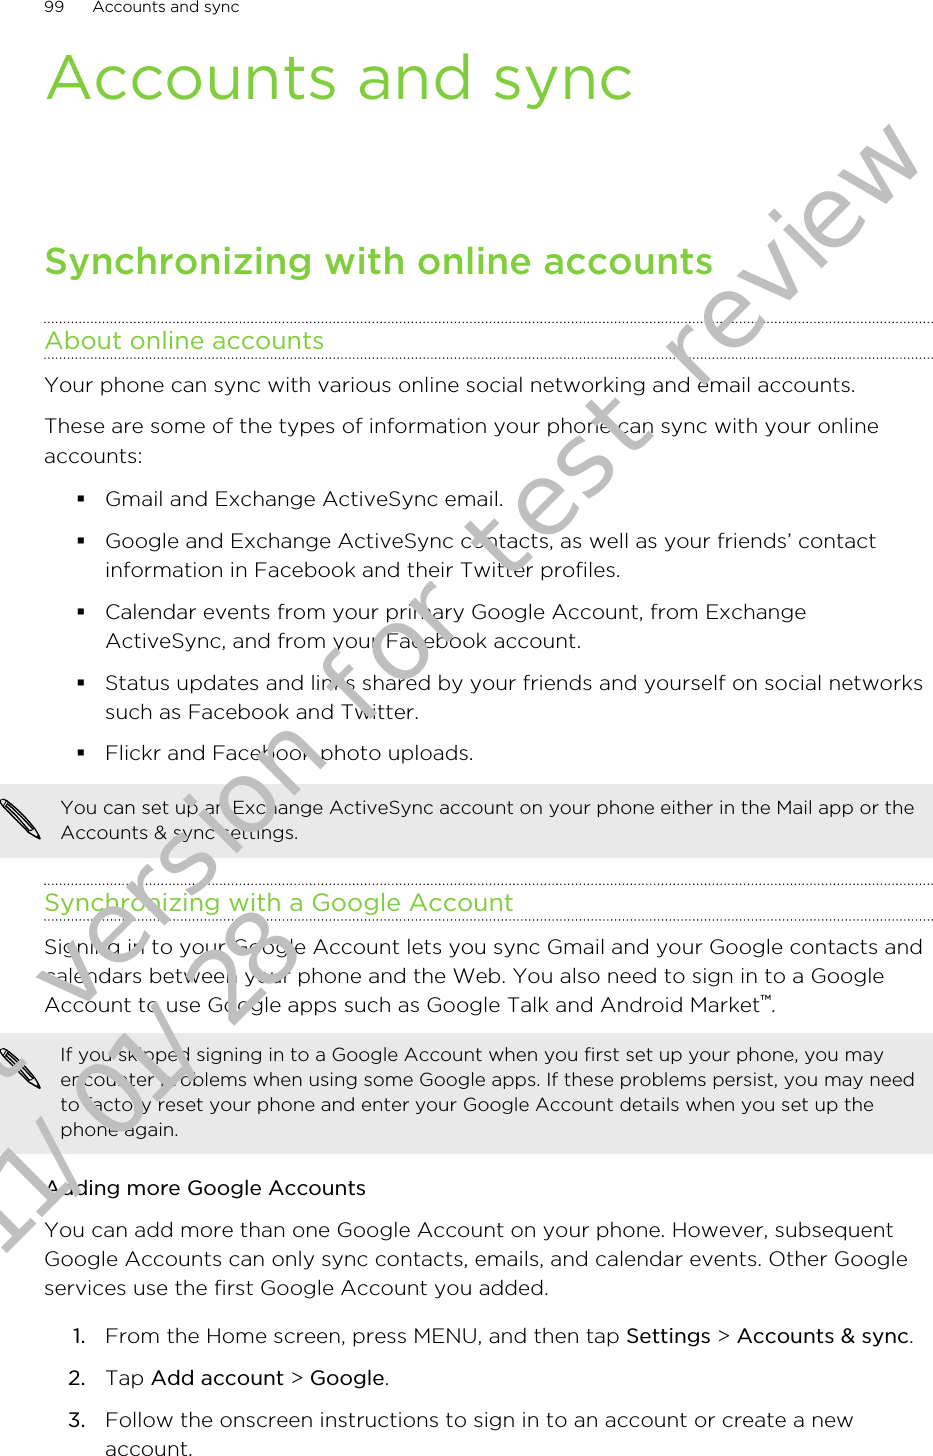 Accounts and syncSynchronizing with online accountsAbout online accountsYour phone can sync with various online social networking and email accounts.These are some of the types of information your phone can sync with your onlineaccounts:§Gmail and Exchange ActiveSync email.§Google and Exchange ActiveSync contacts, as well as your friends’ contactinformation in Facebook and their Twitter profiles.§Calendar events from your primary Google Account, from ExchangeActiveSync, and from your Facebook account.§Status updates and links shared by your friends and yourself on social networkssuch as Facebook and Twitter.§Flickr and Facebook photo uploads.You can set up an Exchange ActiveSync account on your phone either in the Mail app or theAccounts &amp; sync settings.Synchronizing with a Google AccountSigning in to your Google Account lets you sync Gmail and your Google contacts andcalendars between your phone and the Web. You also need to sign in to a GoogleAccount to use Google apps such as Google Talk and Android Market™.If you skipped signing in to a Google Account when you first set up your phone, you mayencounter problems when using some Google apps. If these problems persist, you may needto factory reset your phone and enter your Google Account details when you set up thephone again.Adding more Google AccountsYou can add more than one Google Account on your phone. However, subsequentGoogle Accounts can only sync contacts, emails, and calendar events. Other Googleservices use the first Google Account you added.1. From the Home screen, press MENU, and then tap Settings &gt; Accounts &amp; sync.2. Tap Add account &gt; Google.3. Follow the onscreen instructions to sign in to an account or create a newaccount.99 Accounts and syncDraft version for test review 2011/01/28 